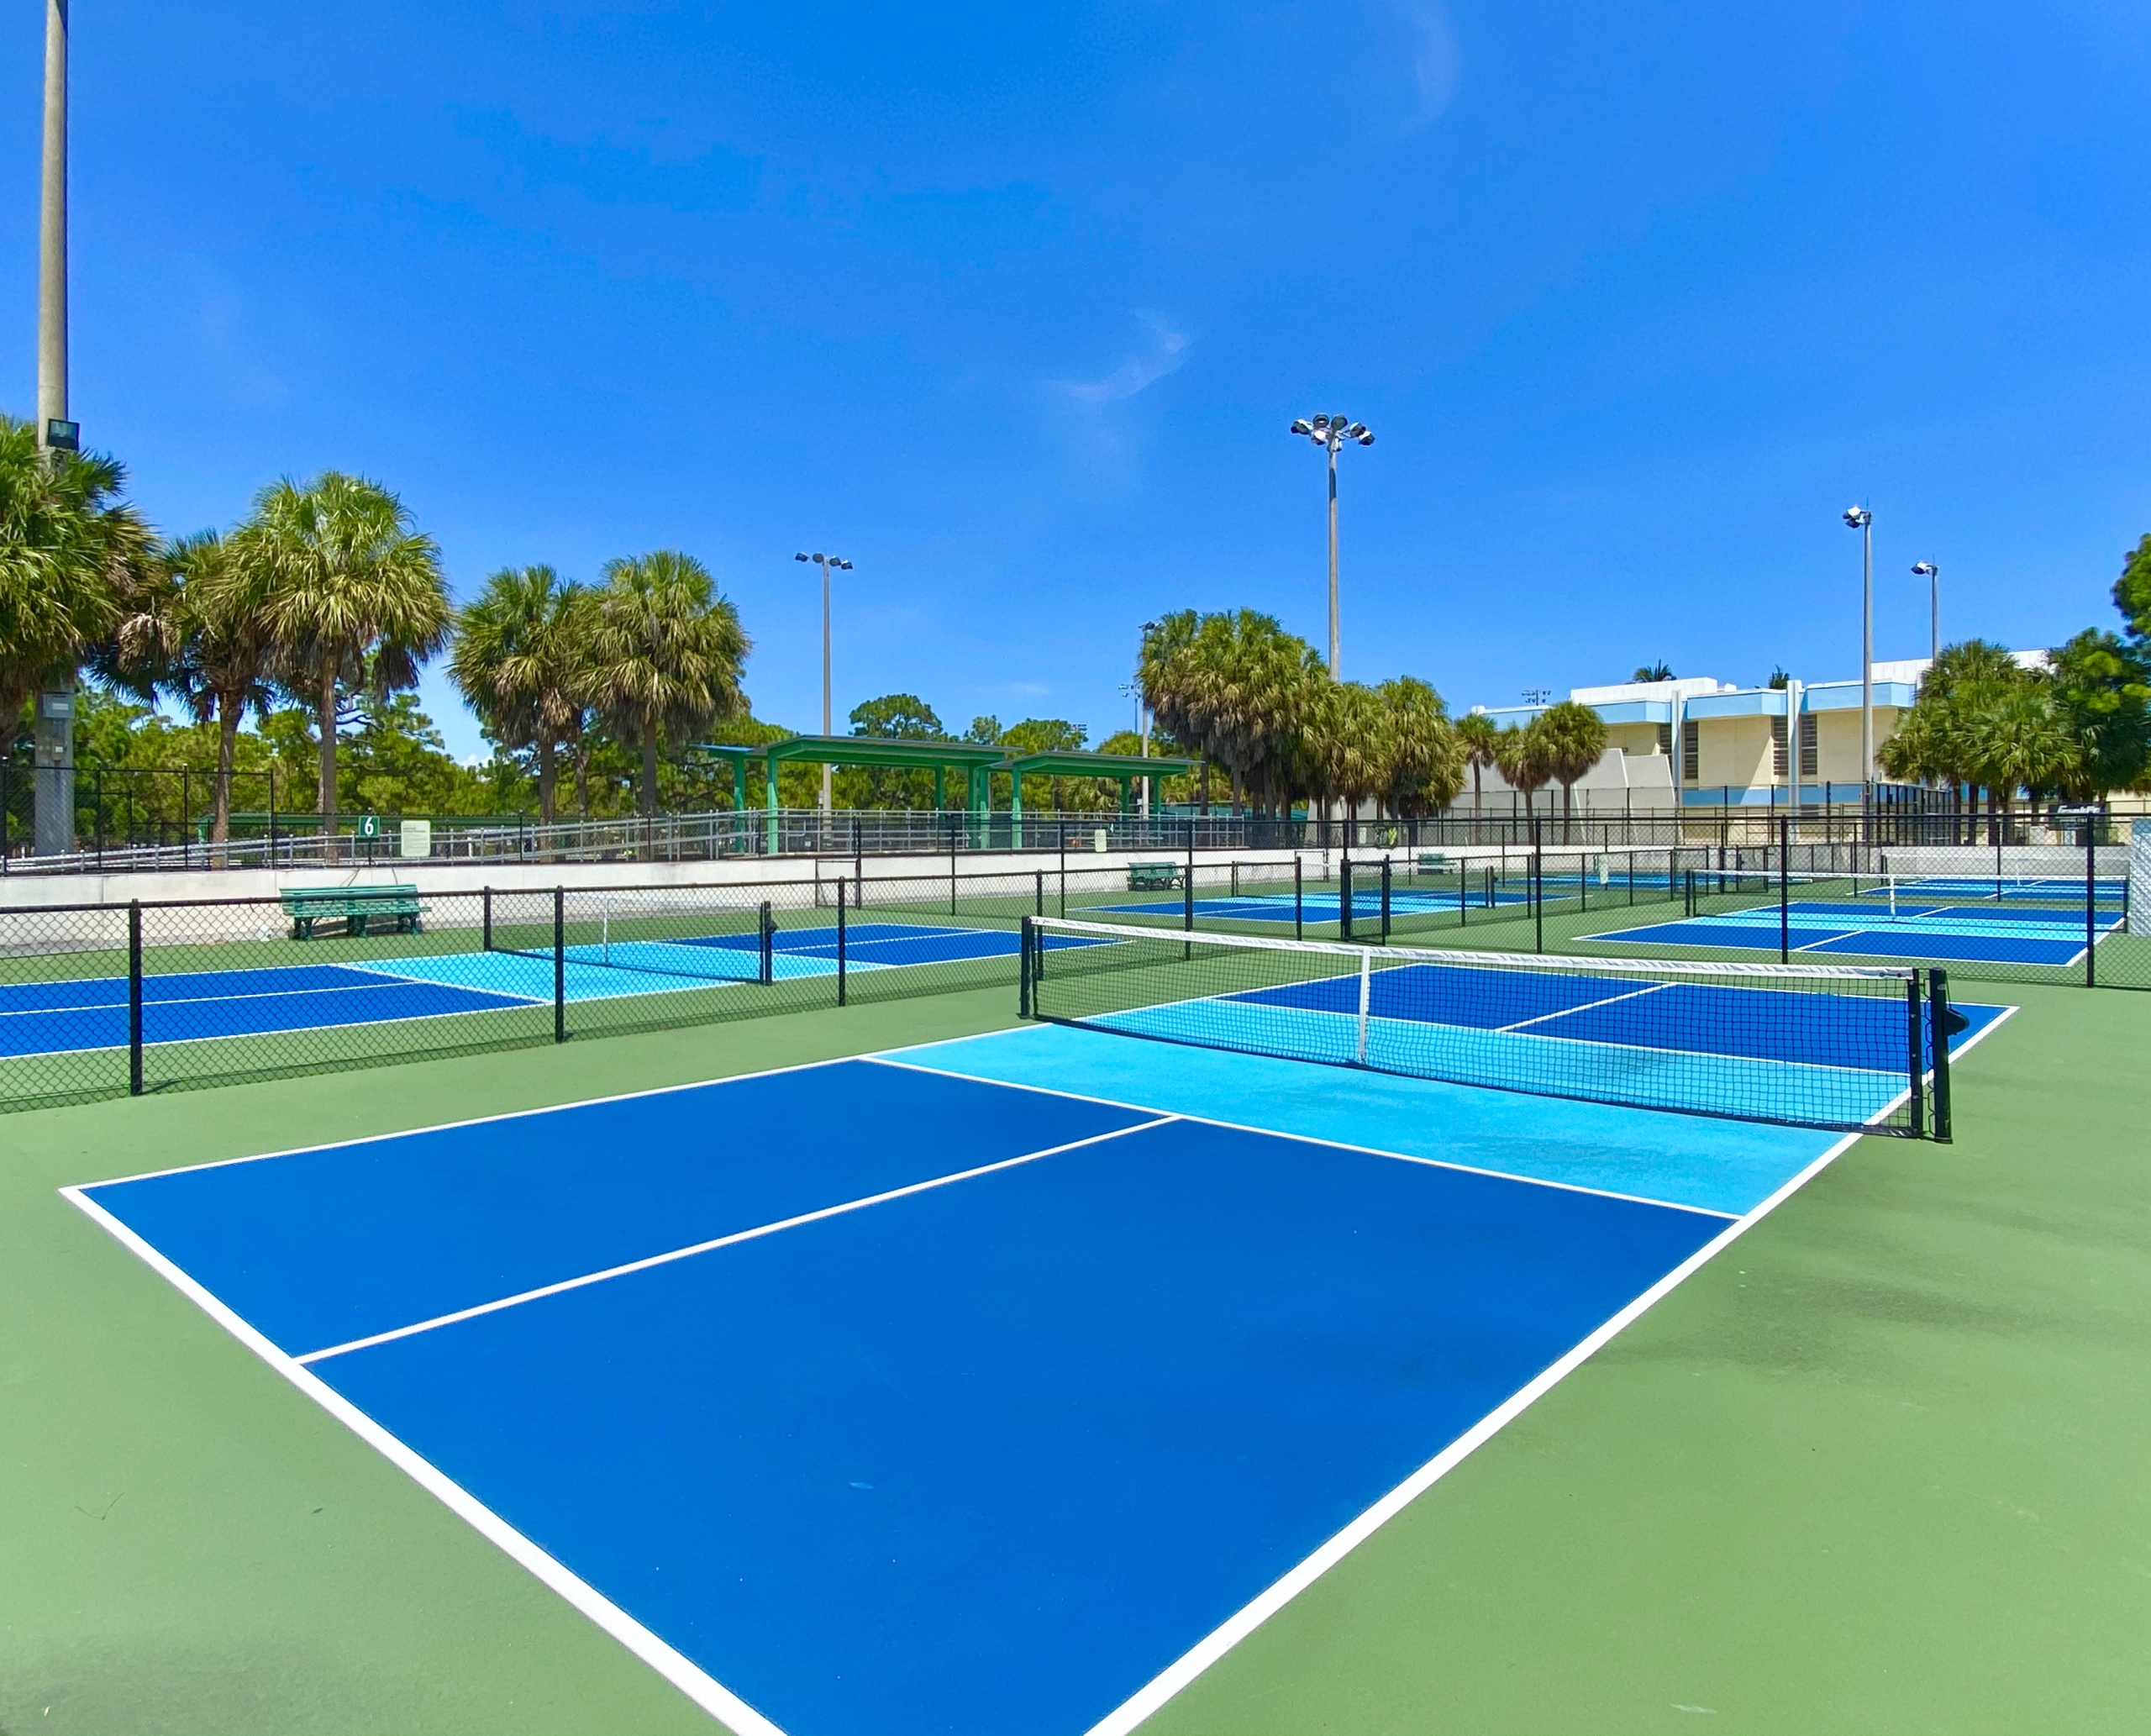 Recreational Facilities offered at Holiday Park in Downtown Fort Lauderdale